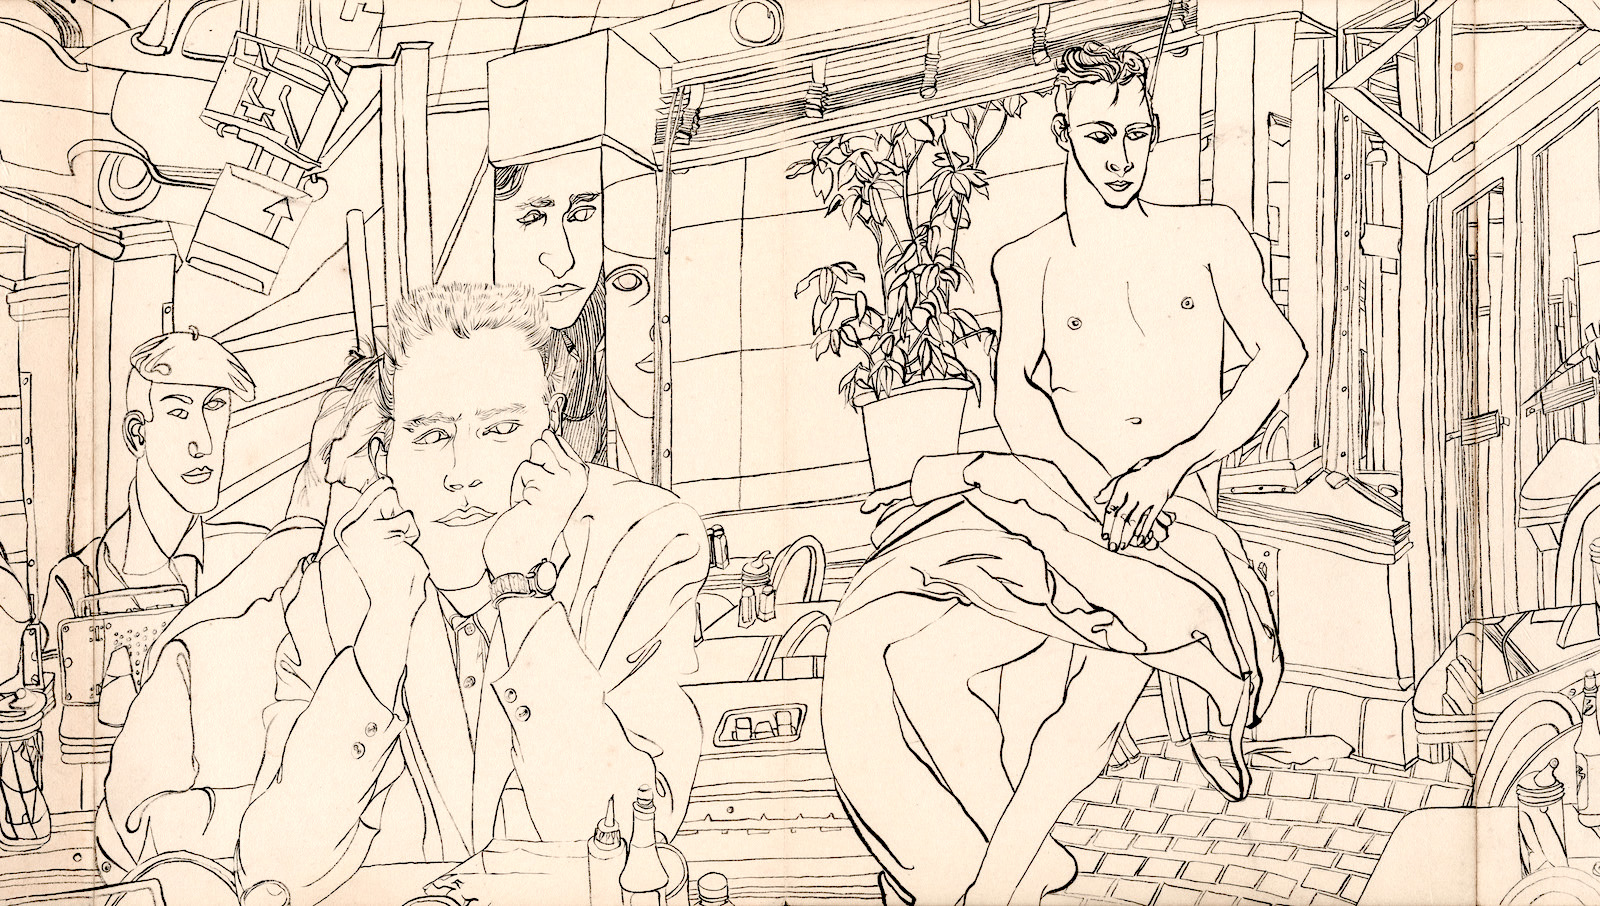 Nazi Gay Sex Drawing - Read These Drawings Like a Book - The Gay & Lesbian Review